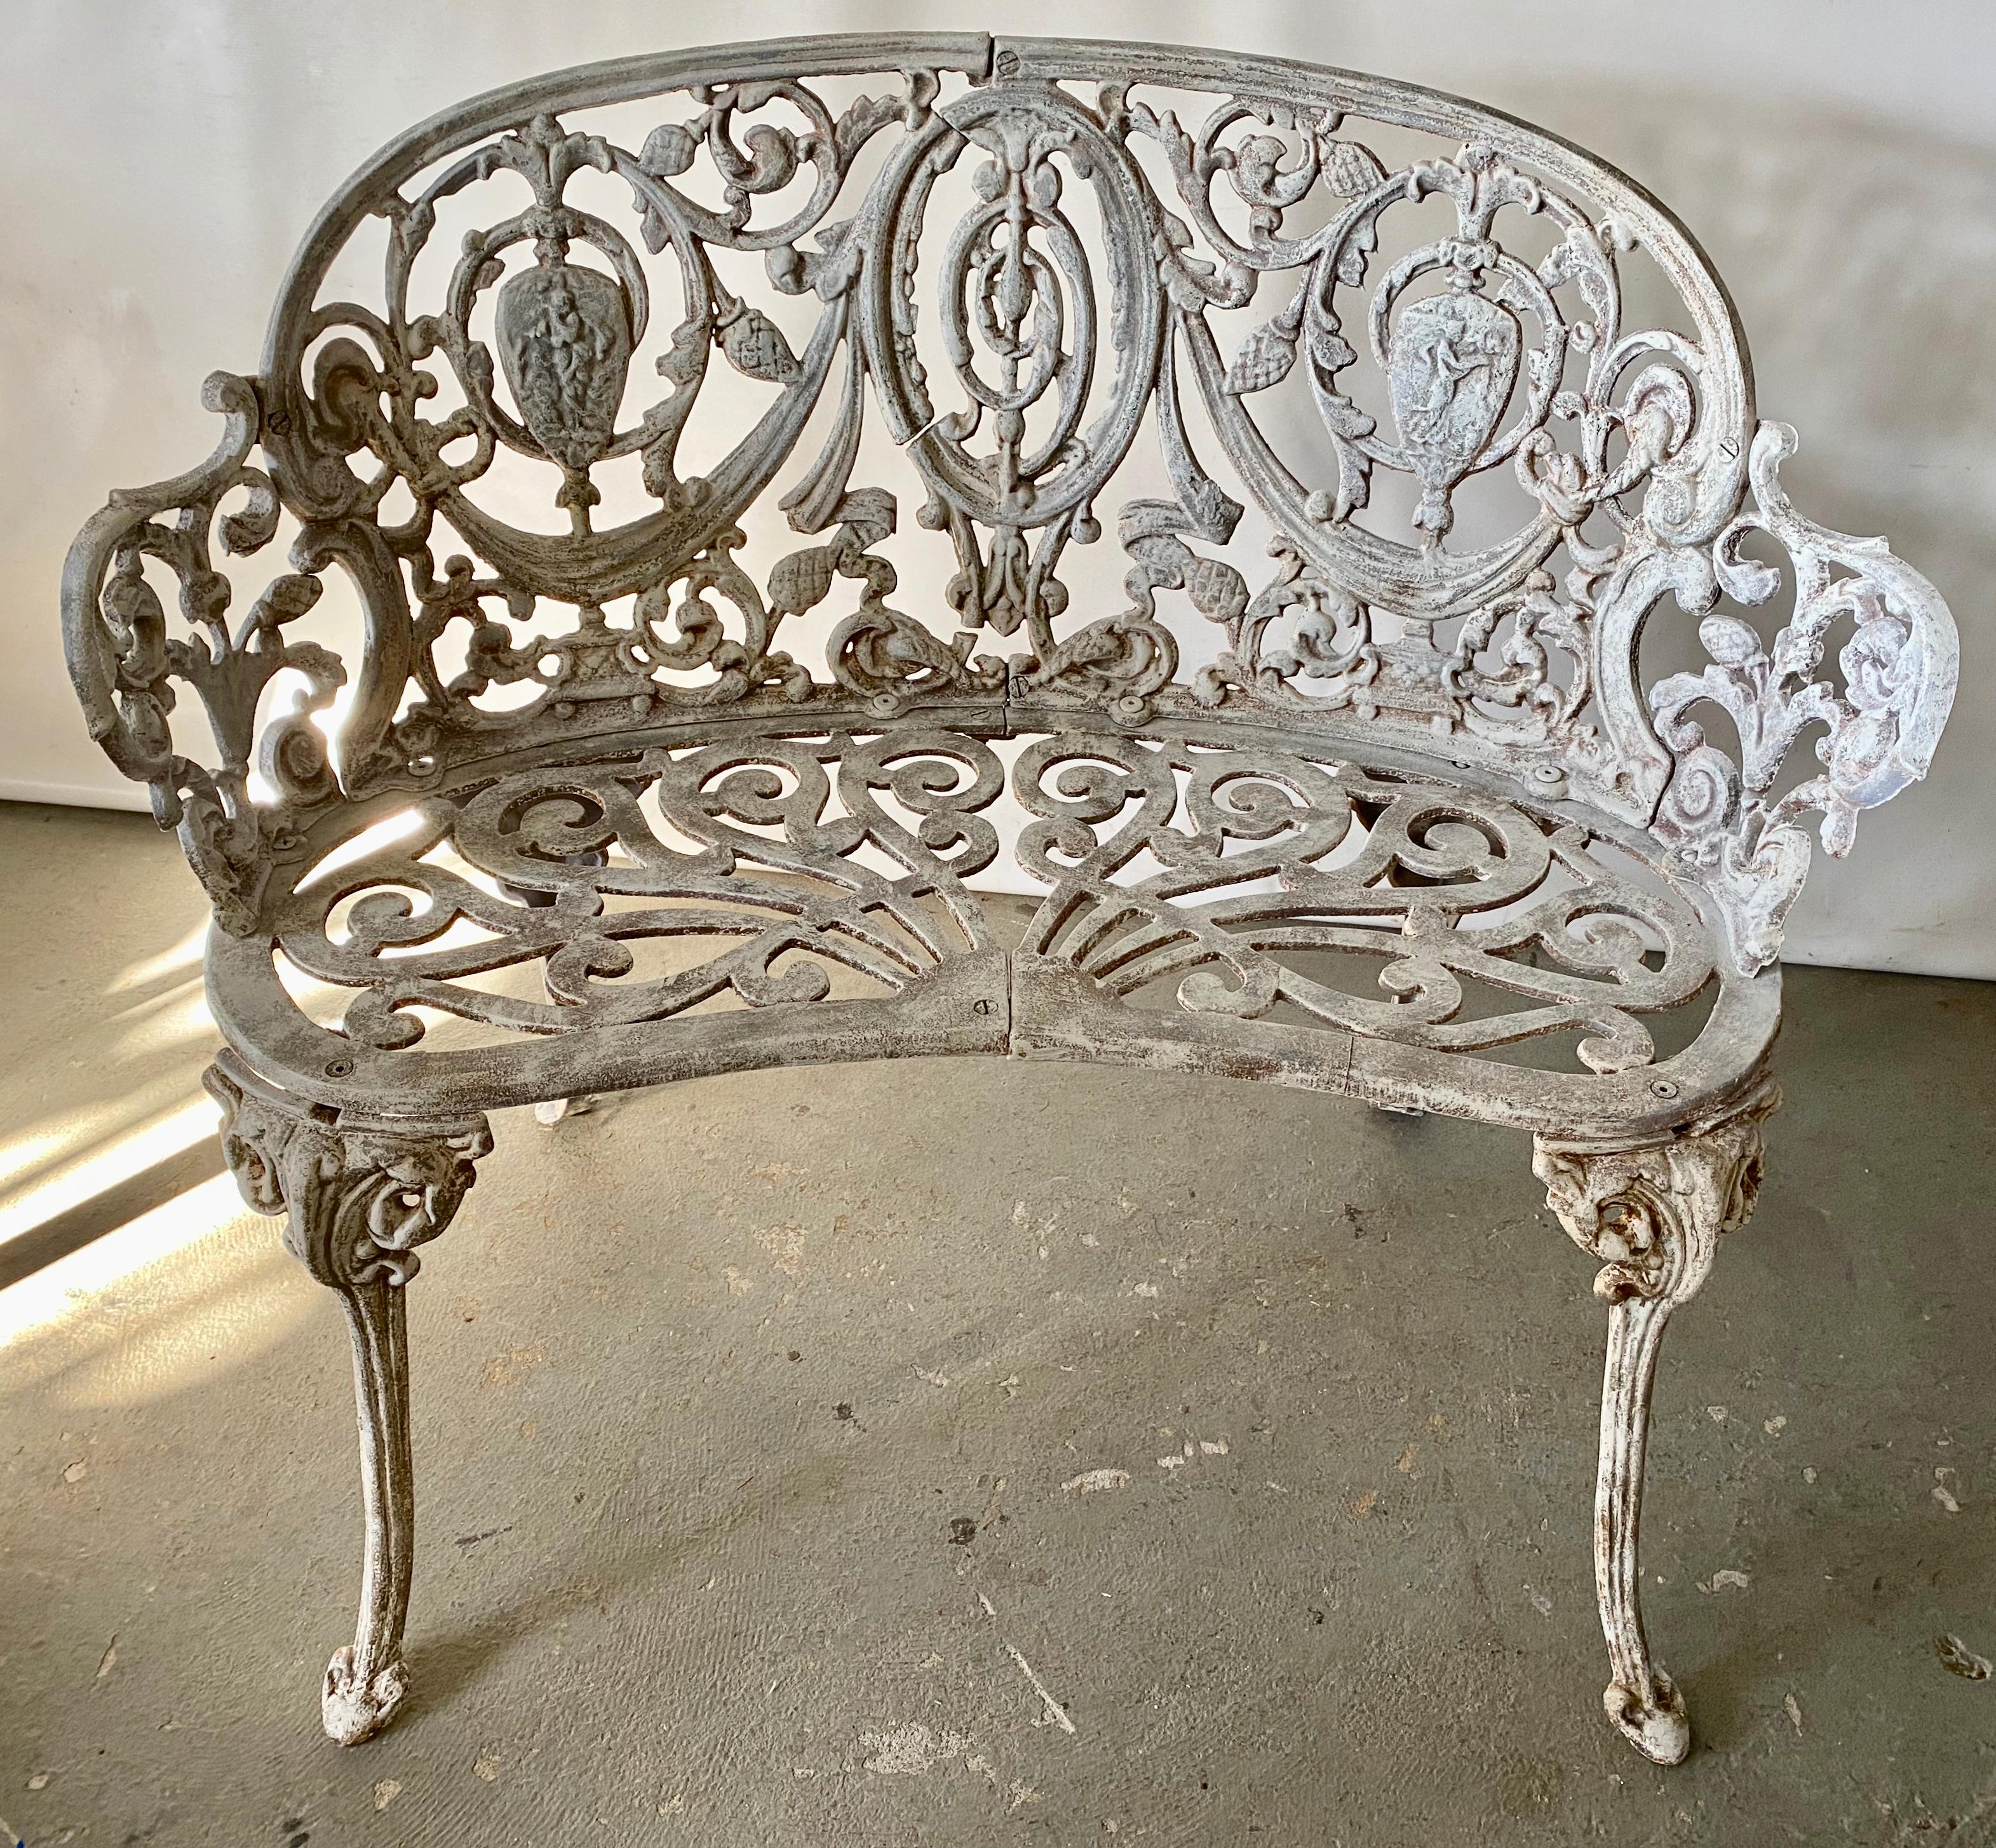 Cast iron Coalbrookdale style garden or patio bench painted white. Perfect for summer entertaining or morning coffee on a patio, front porch or garden. 
Search terms: Hollywood Regency style patio furniture, baroque styling, neoclassical, cast iron